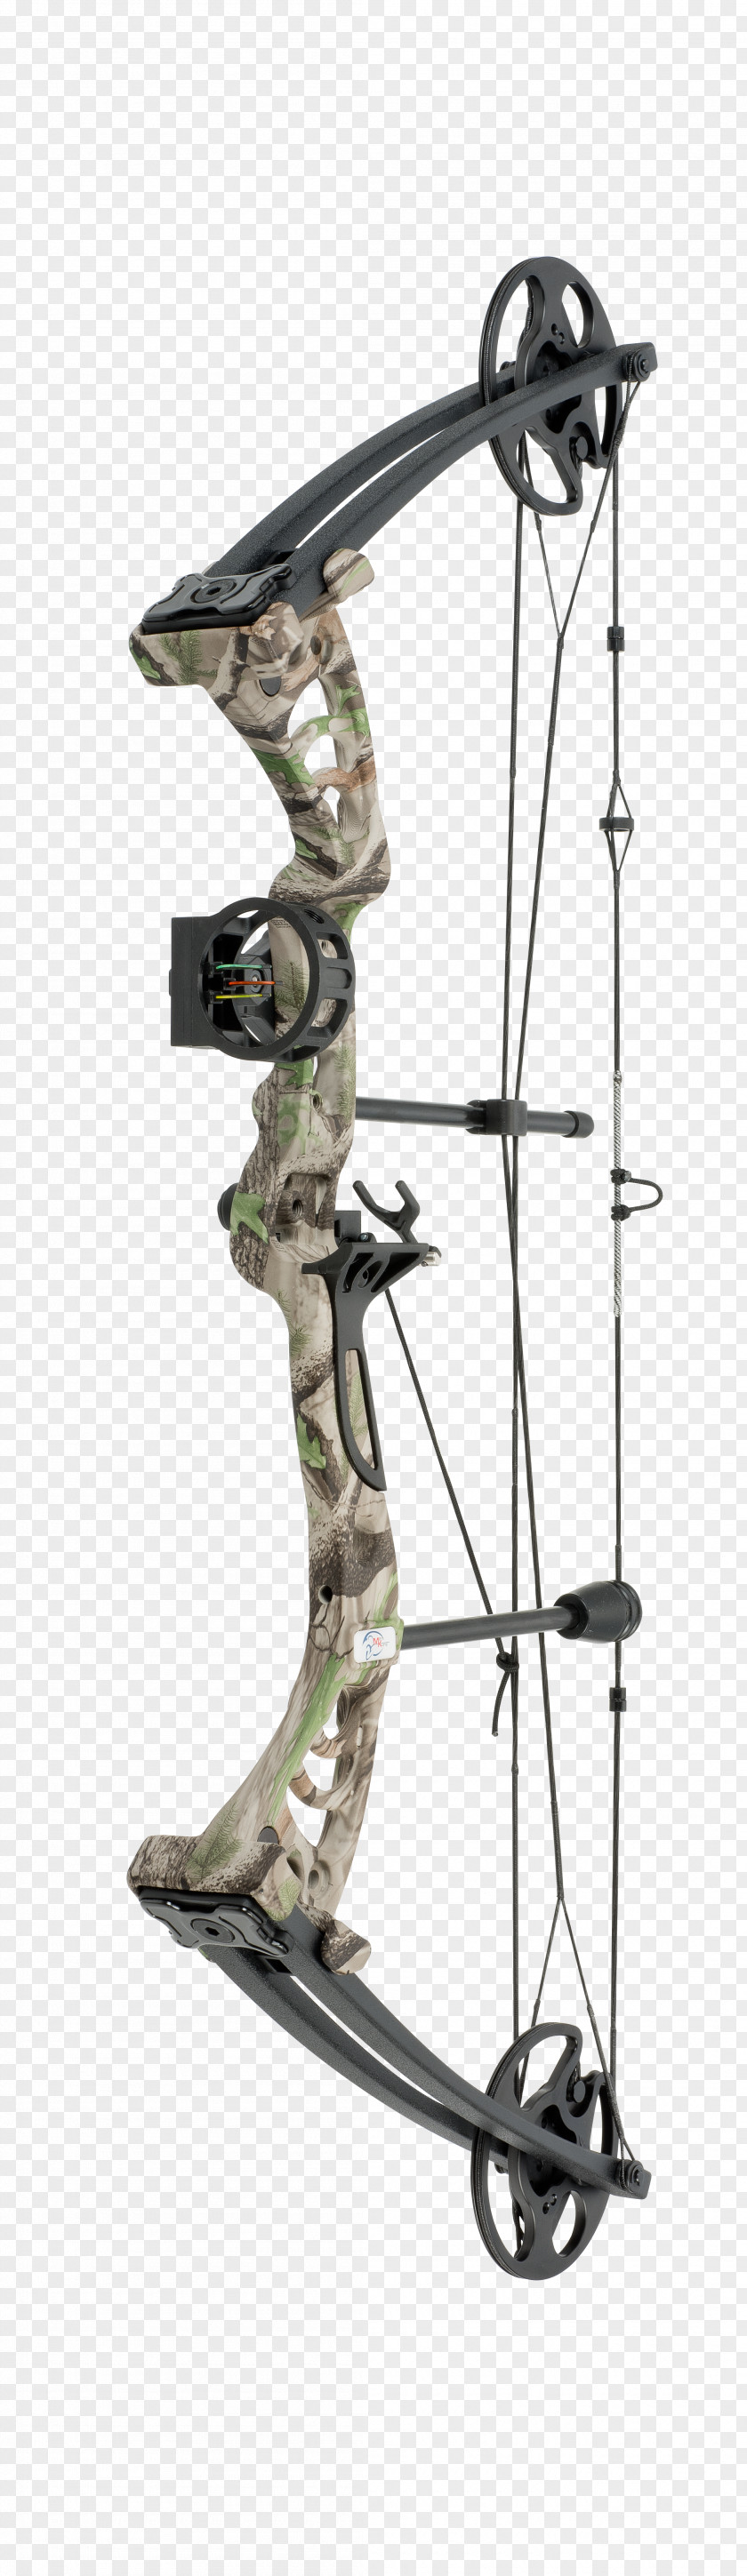 Bow Compound Bows And Arrow Hunting Crossbow PNG